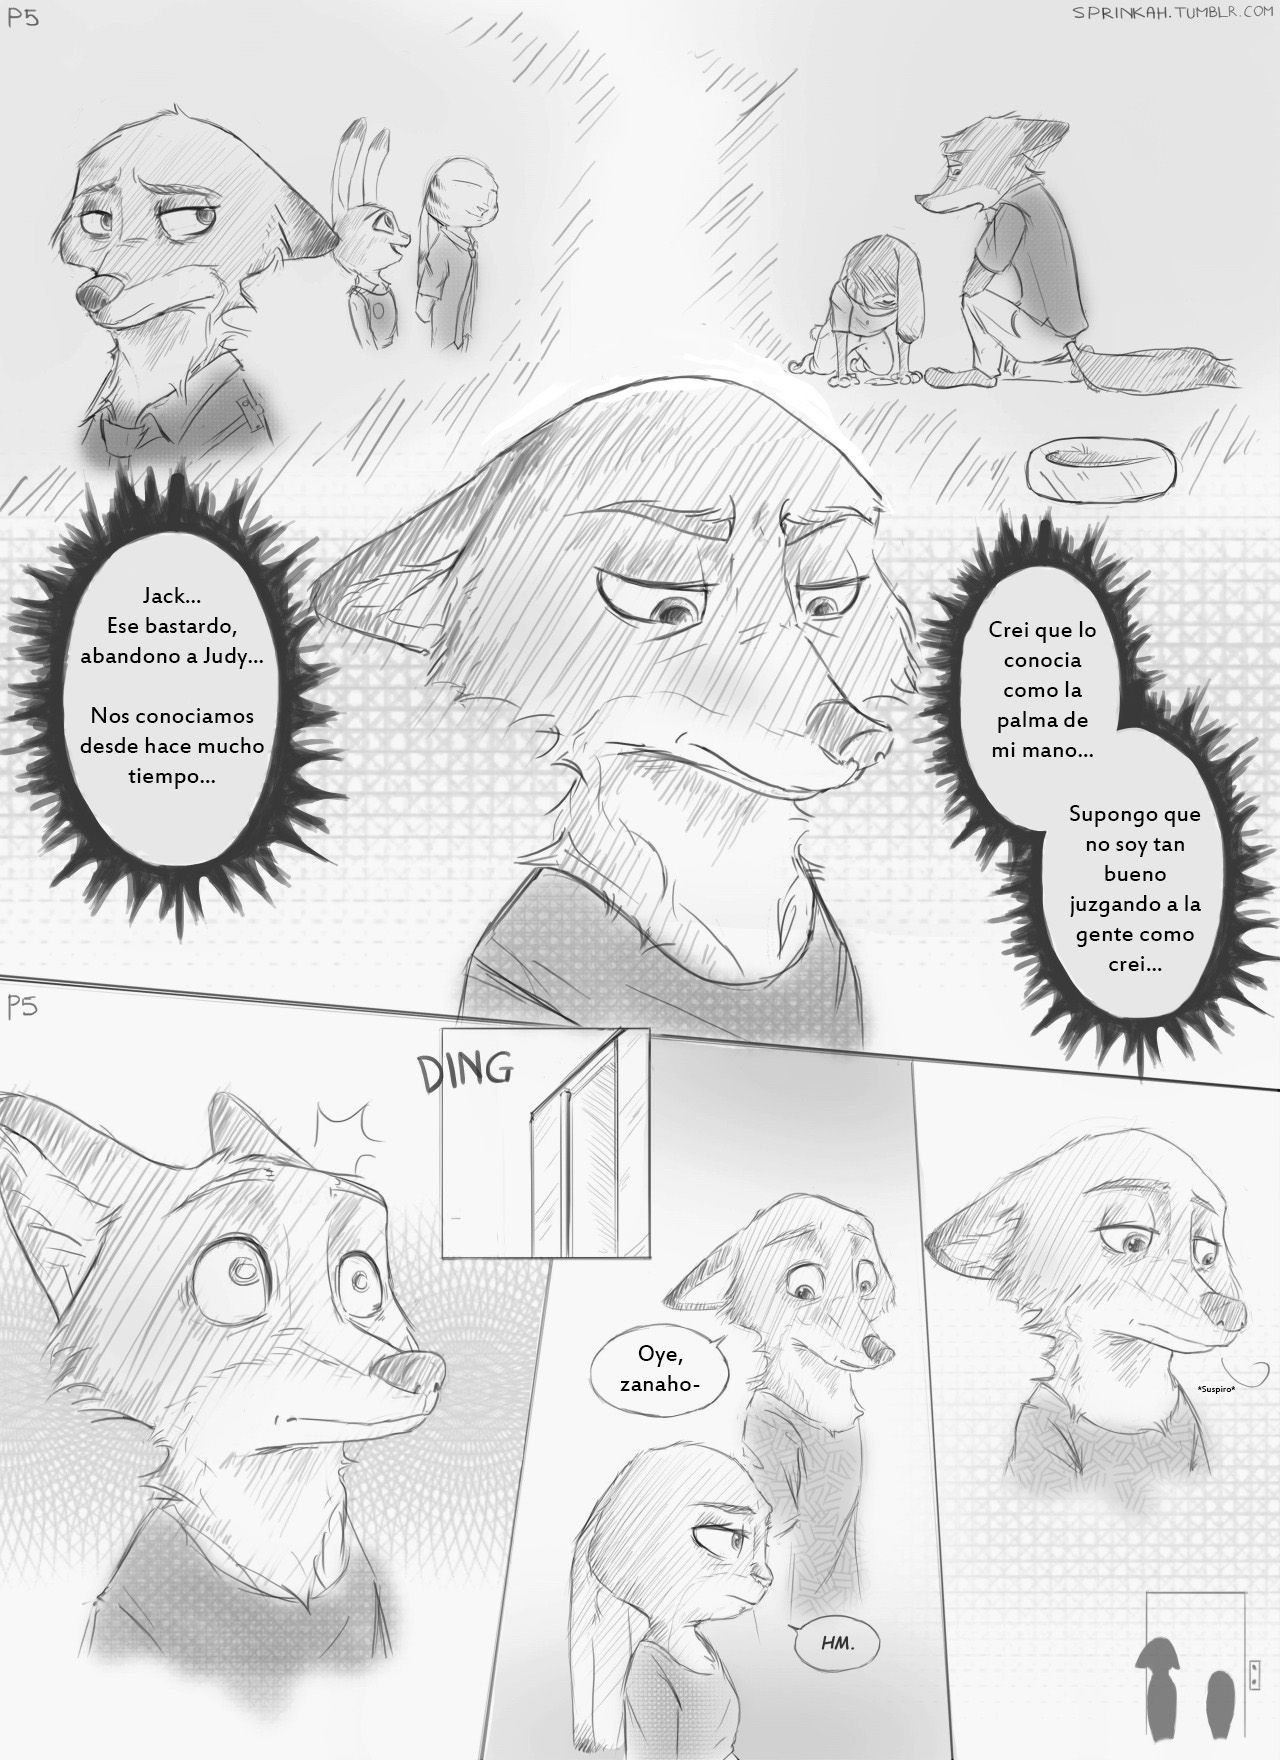 [Sprinkah] This is what true love looks like (Zootopia) (Spanish) (On Going) [Landsec] http://sprinkah.tumblr.com/ 10